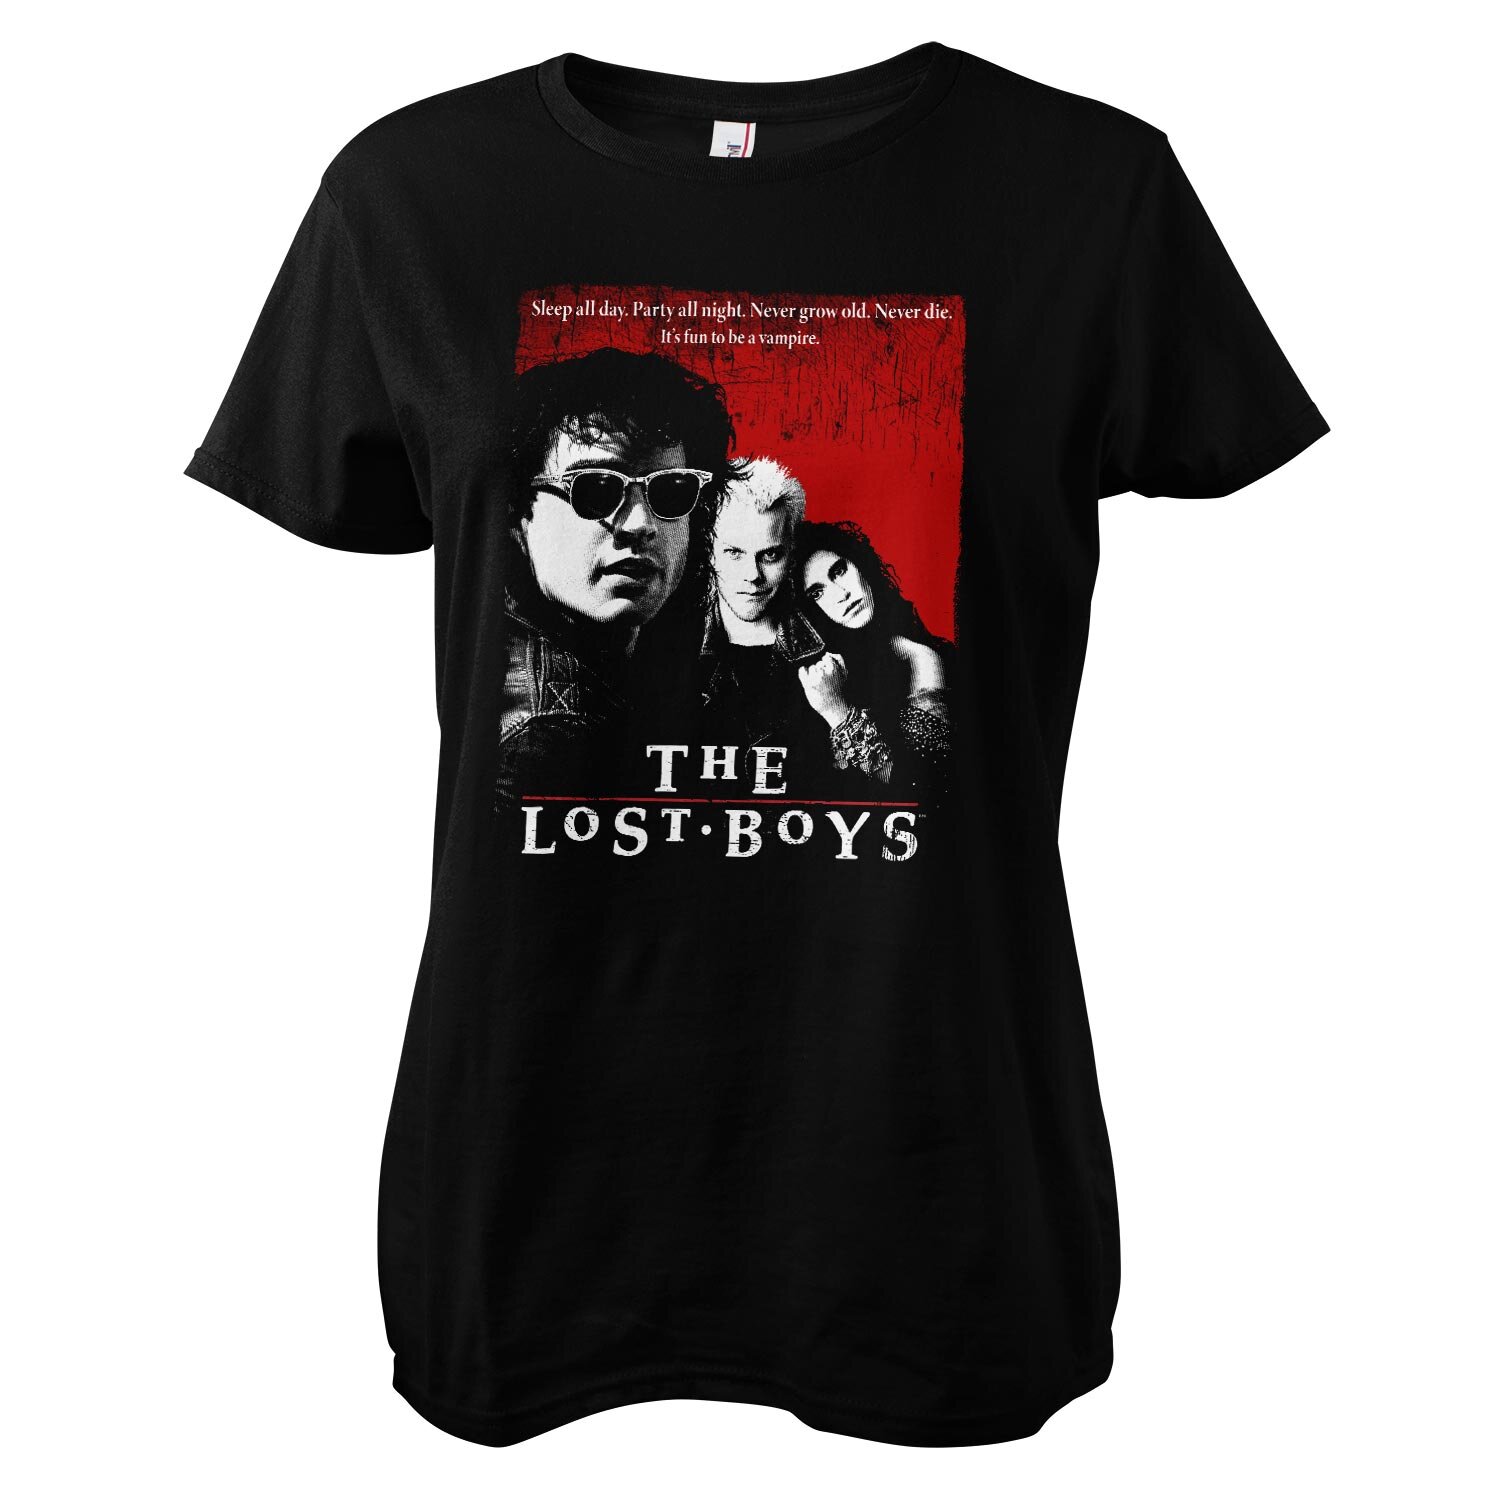 The Lost Boys Girly Tee